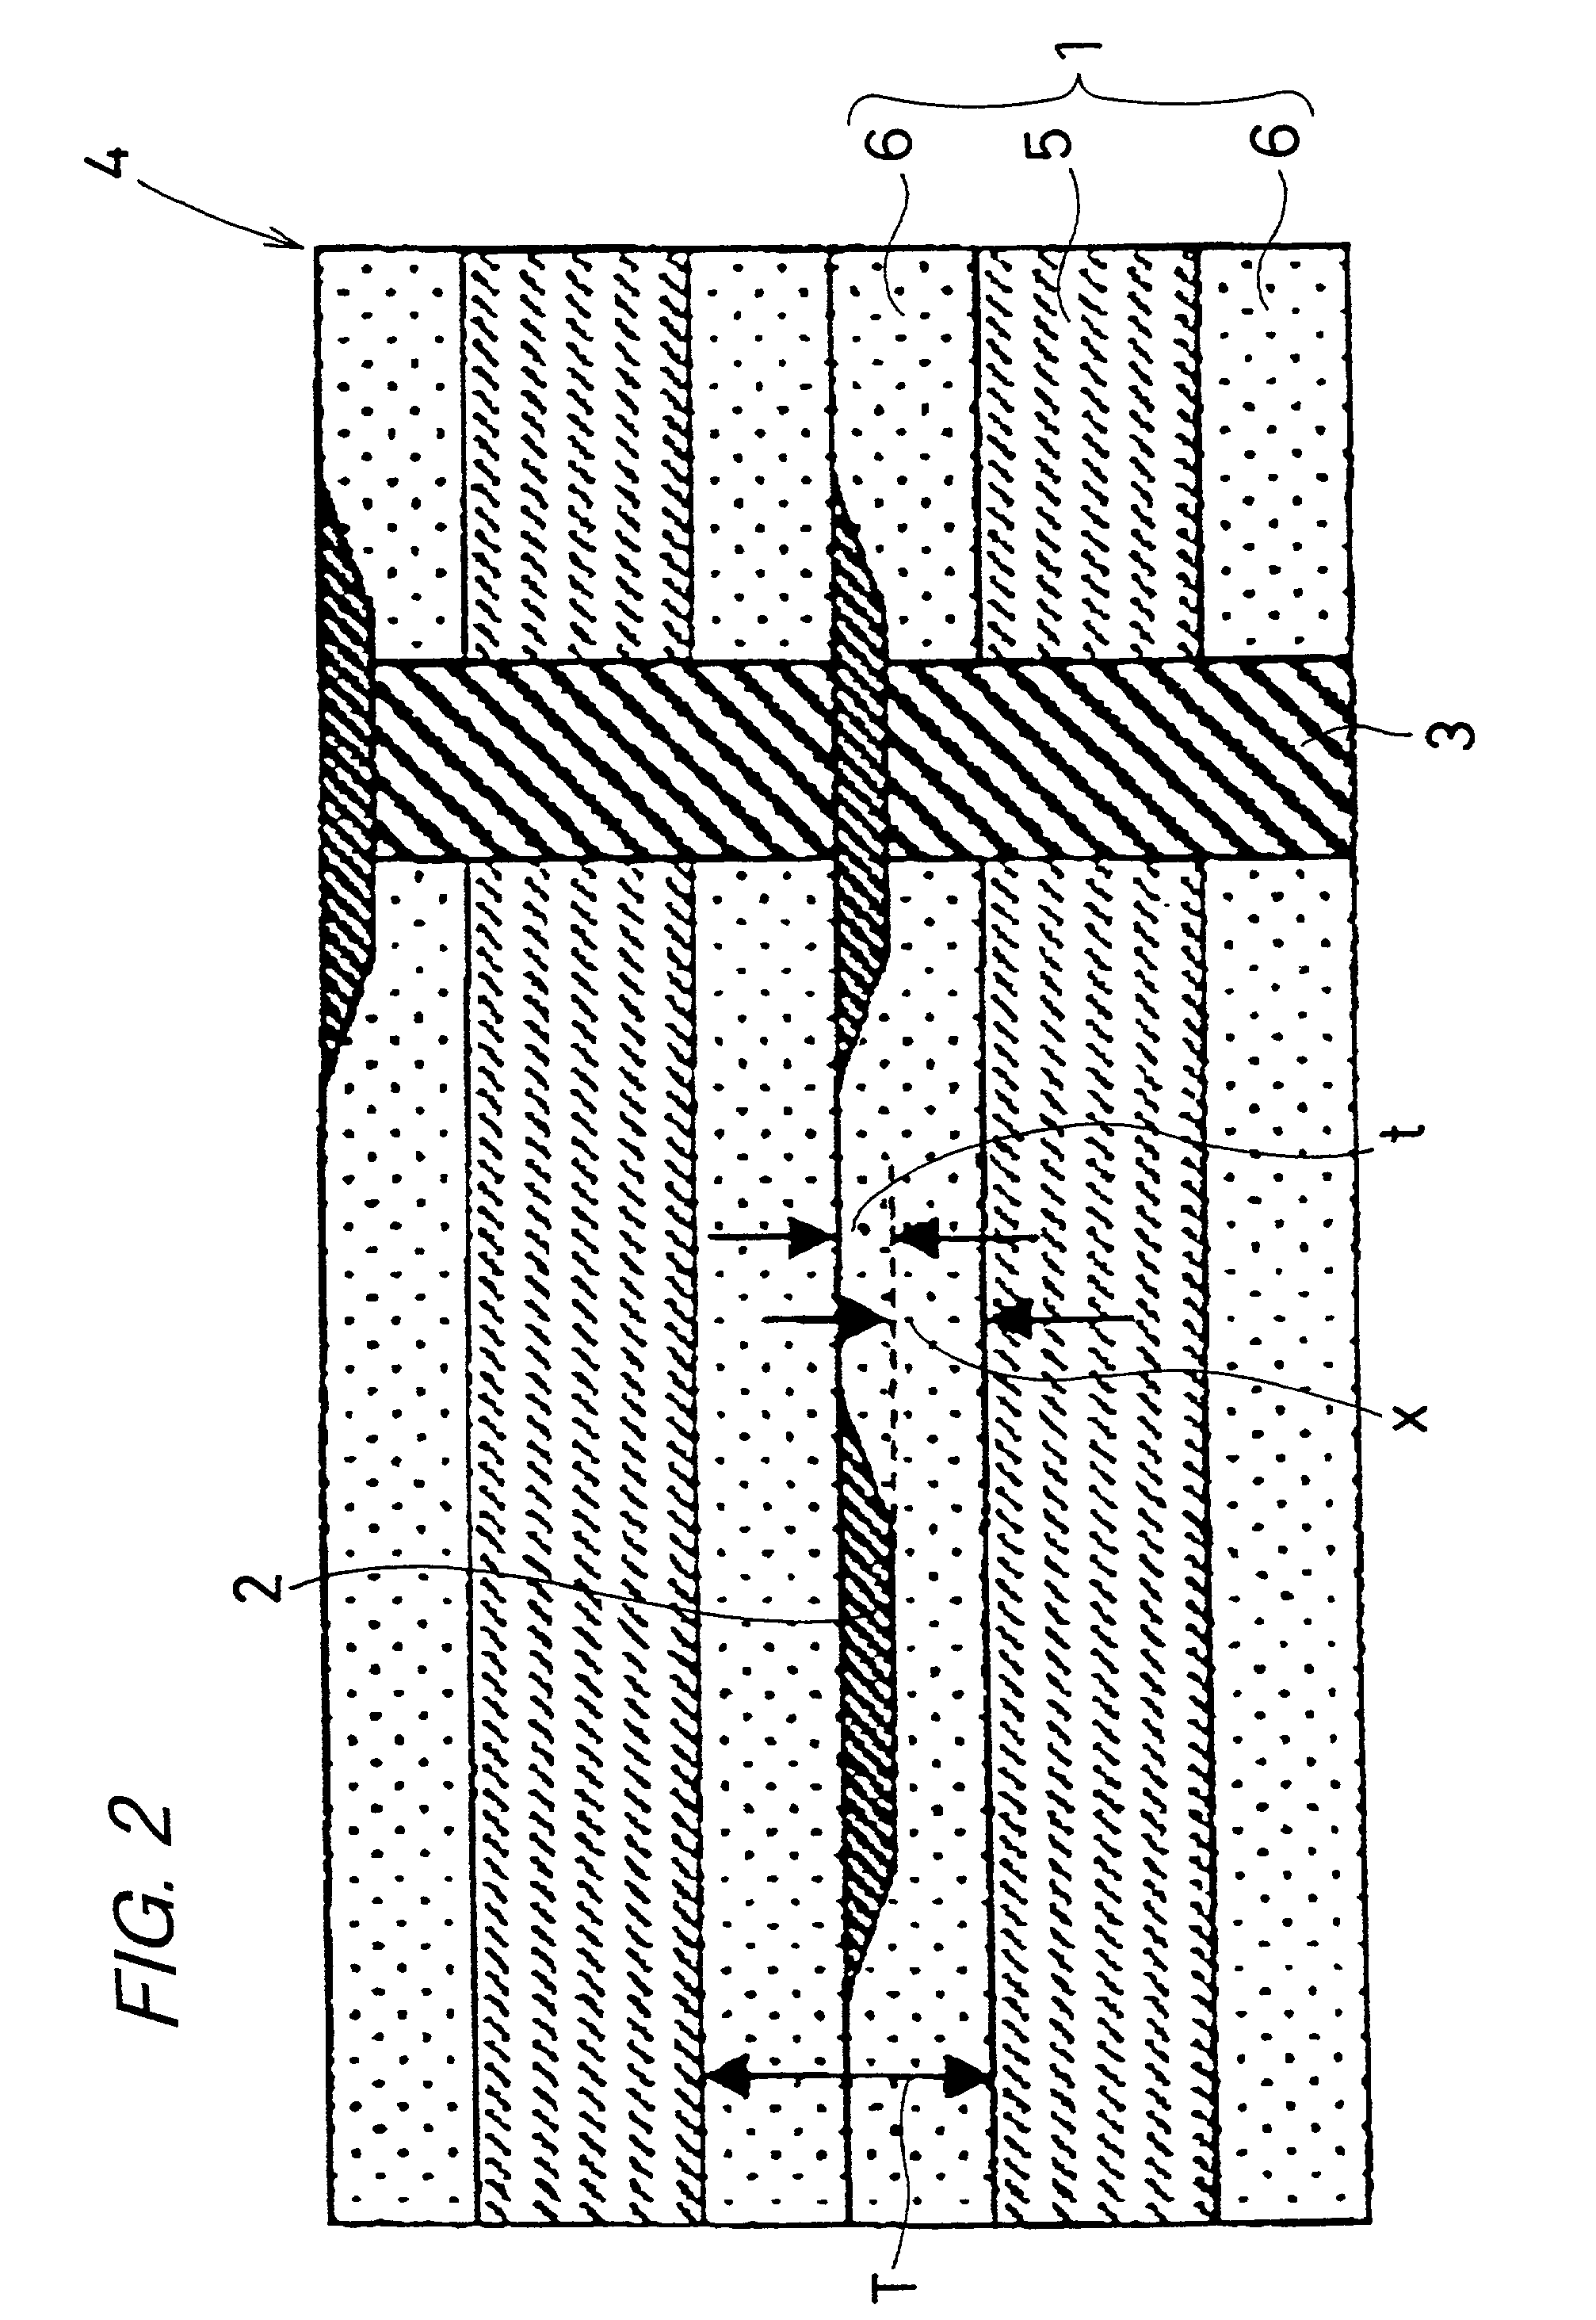 Multi-layer wiring substrate